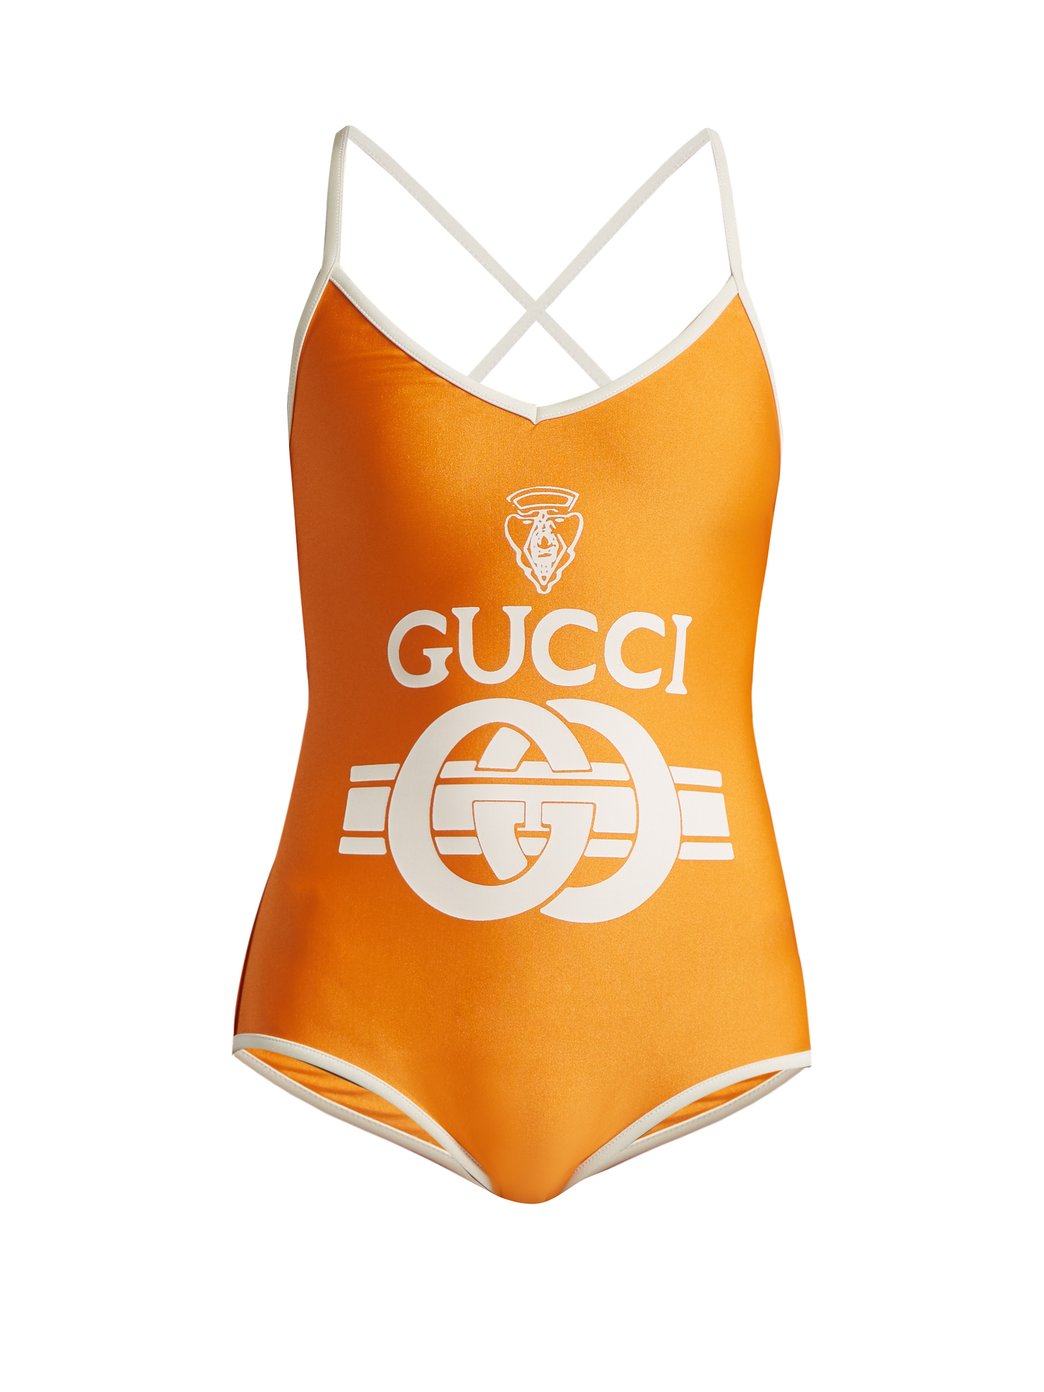 Gucci Restocks Its Vintage Logo Swimsuit In Red, Orange And Purple